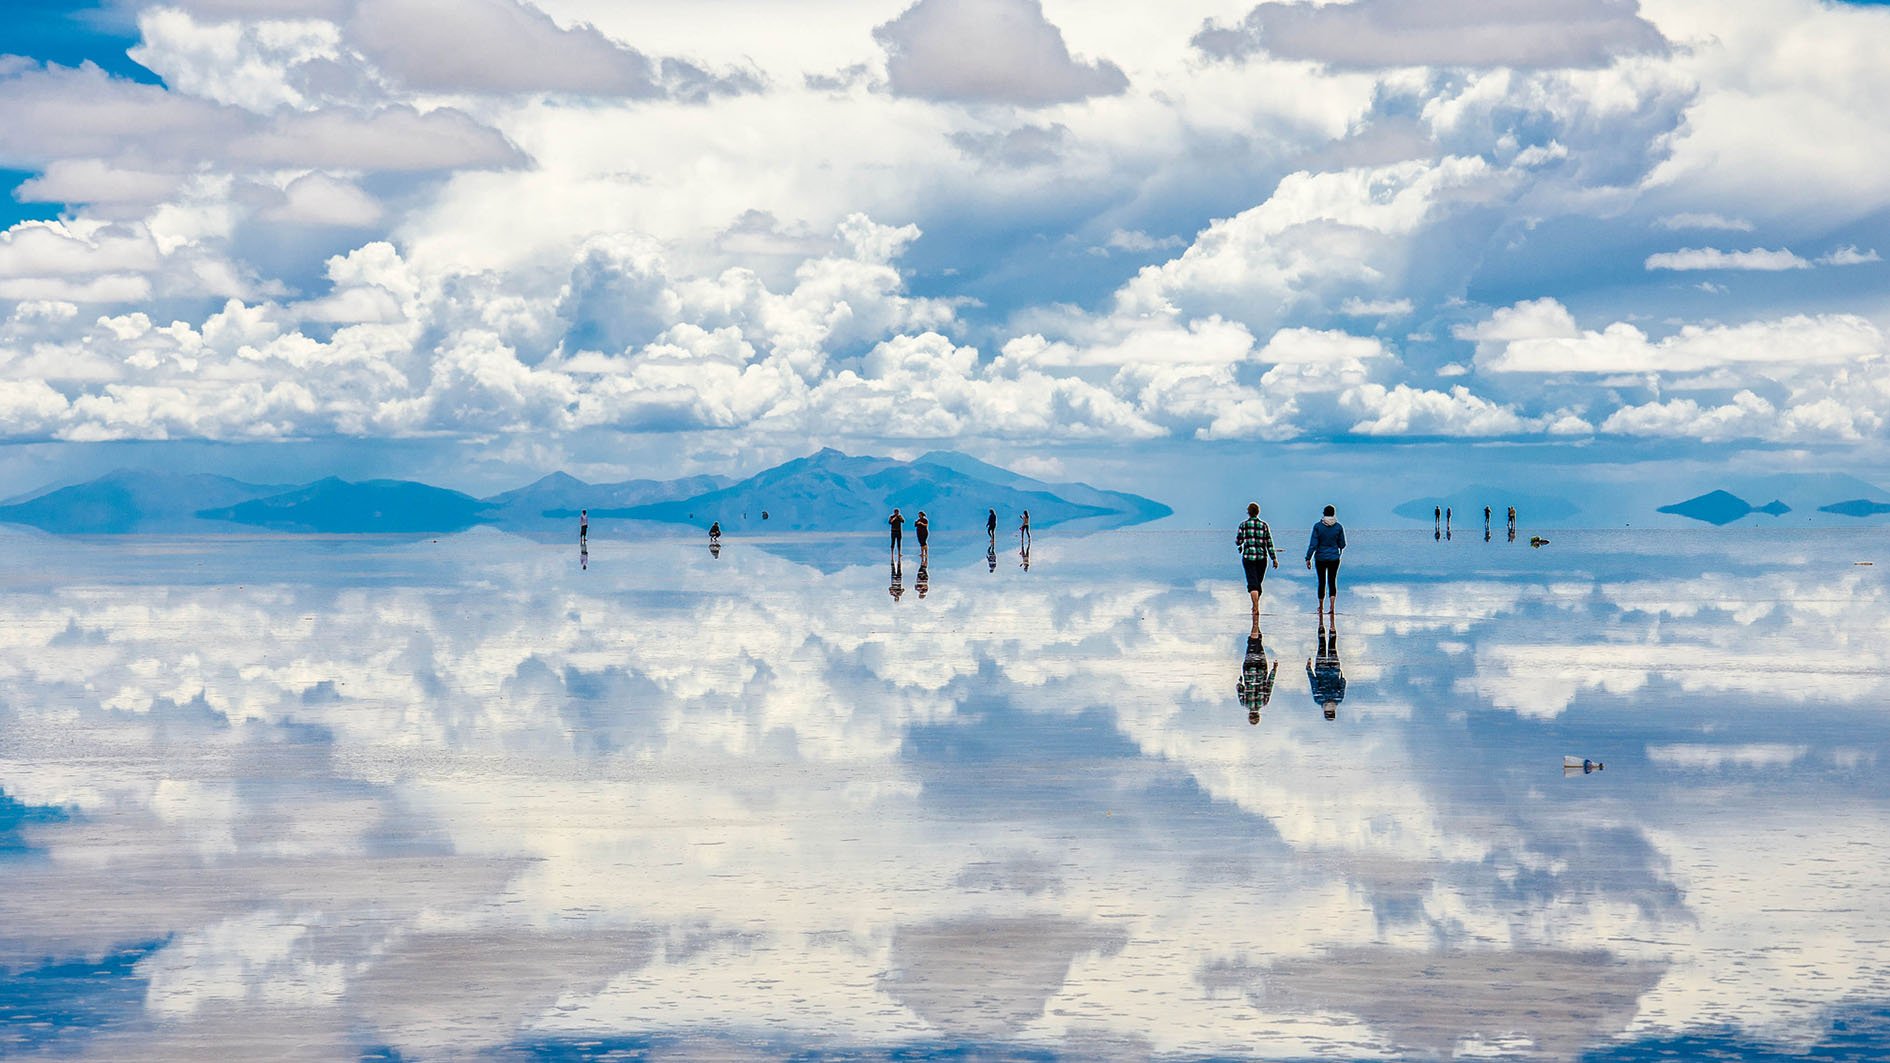 Drone captures ethereal view at Uyuni salt flat in Bolivia - CGTN